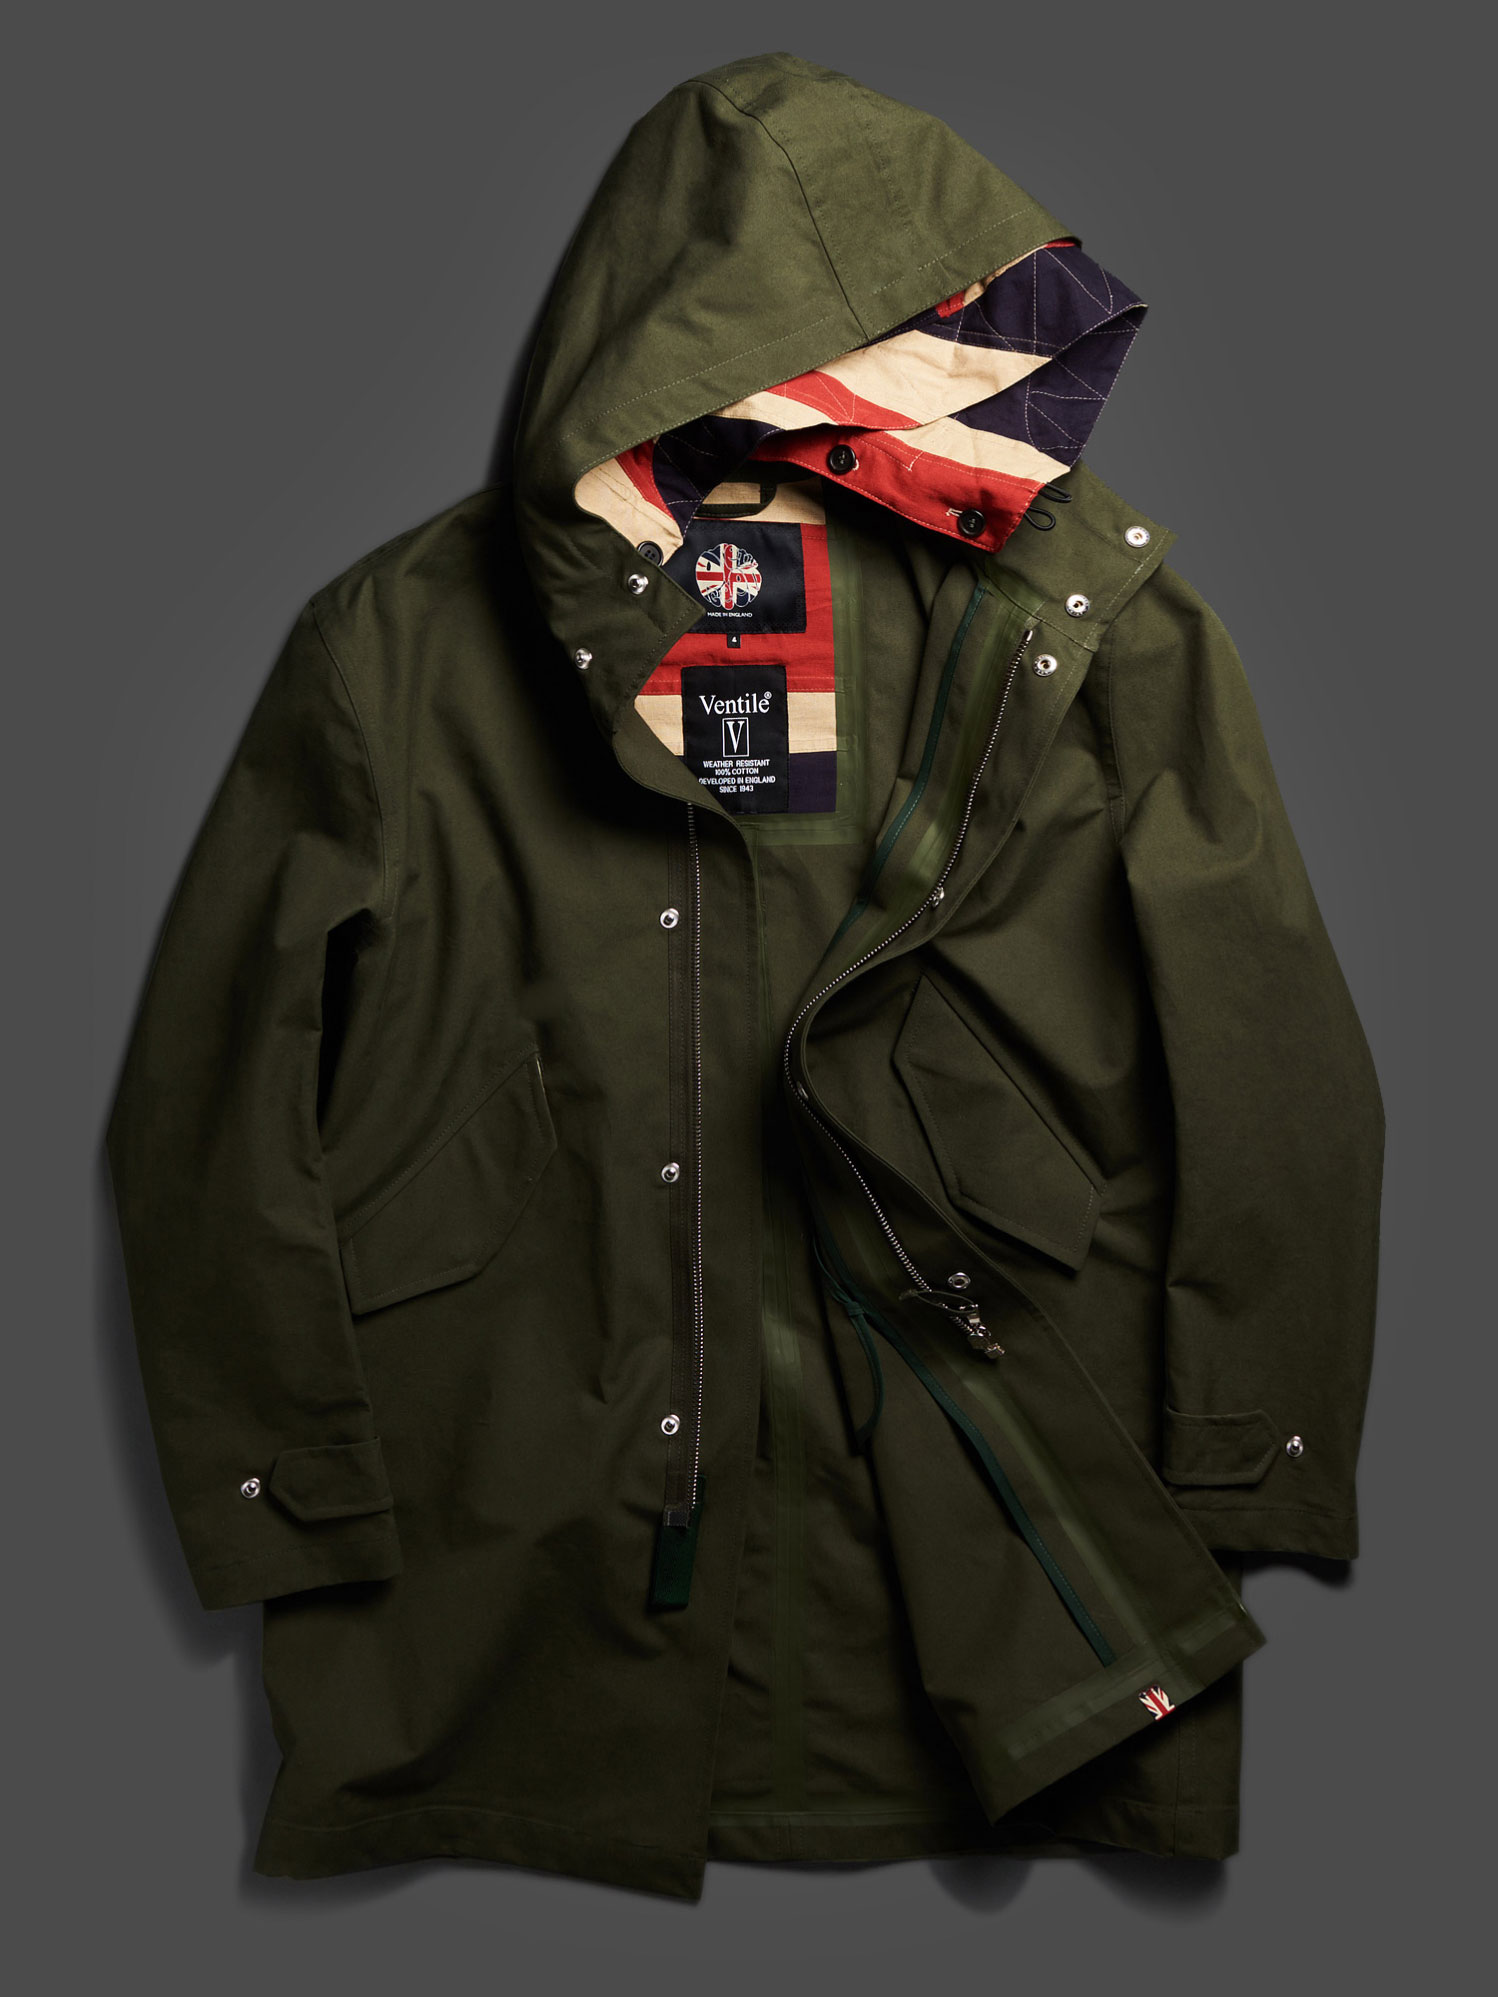 Made in England | Pretty Green | Men's Clothing and Accessories.